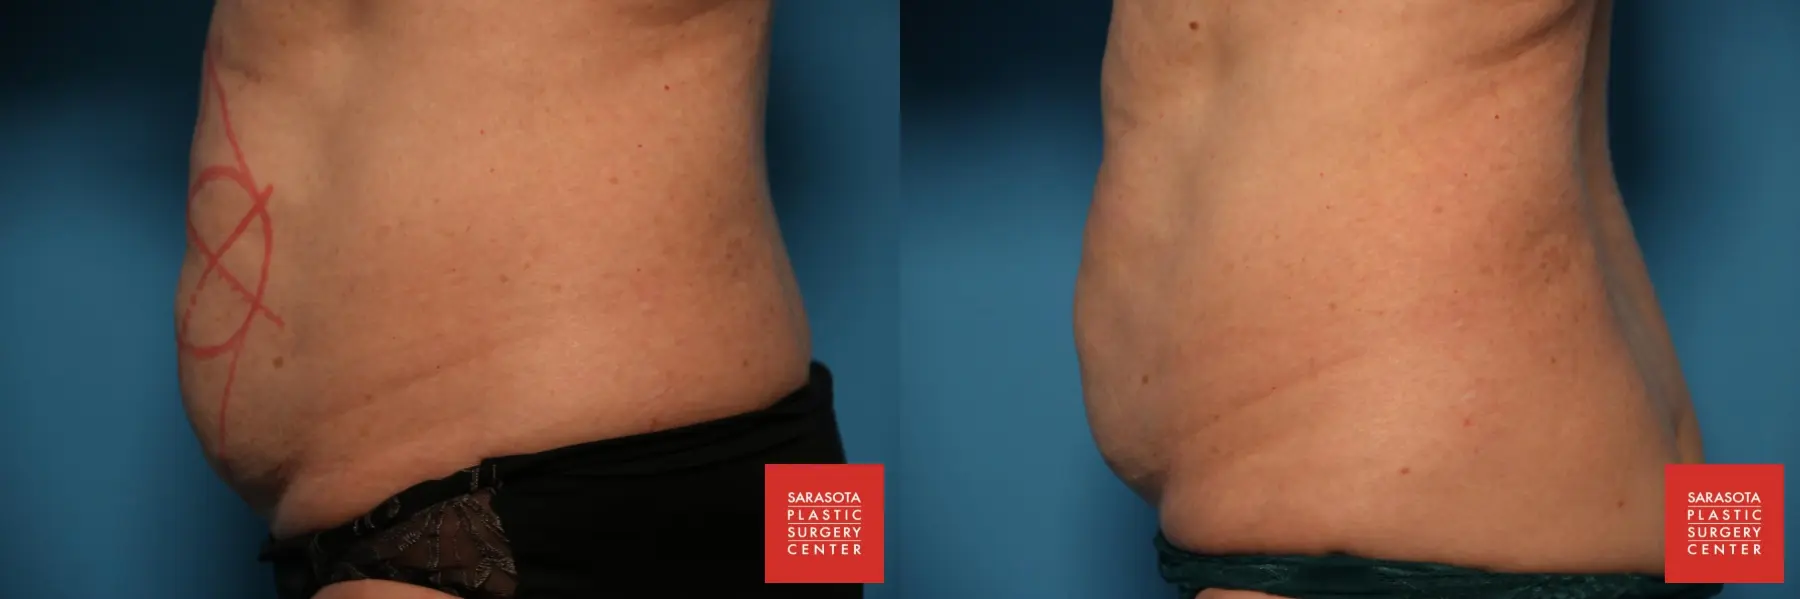 CoolSculpting®: Patient 7 - Before and After 3